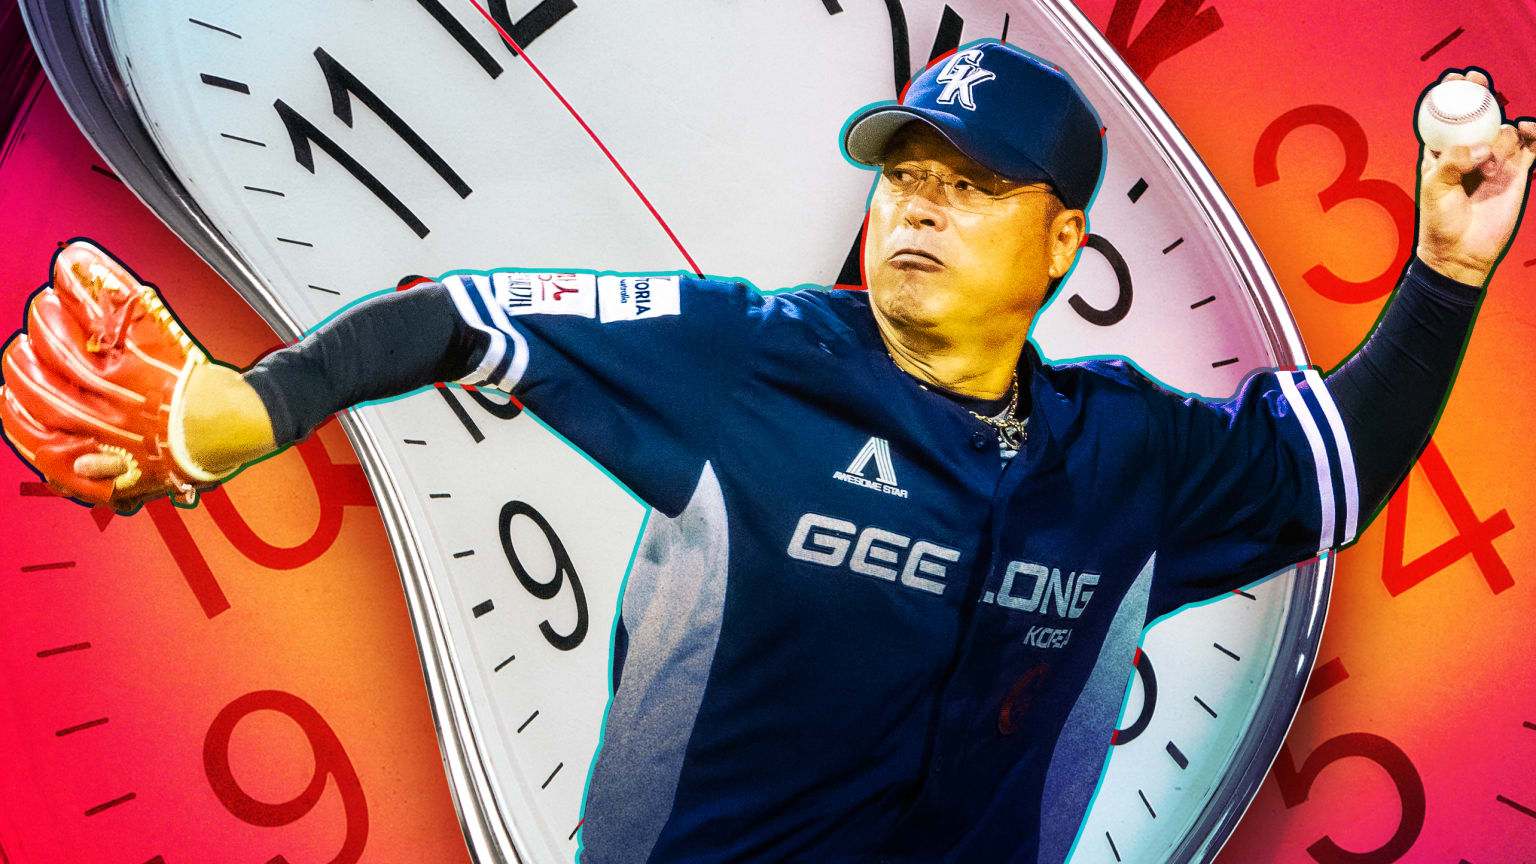 Dae-Sung Koo is shown pitching with a clock in the background